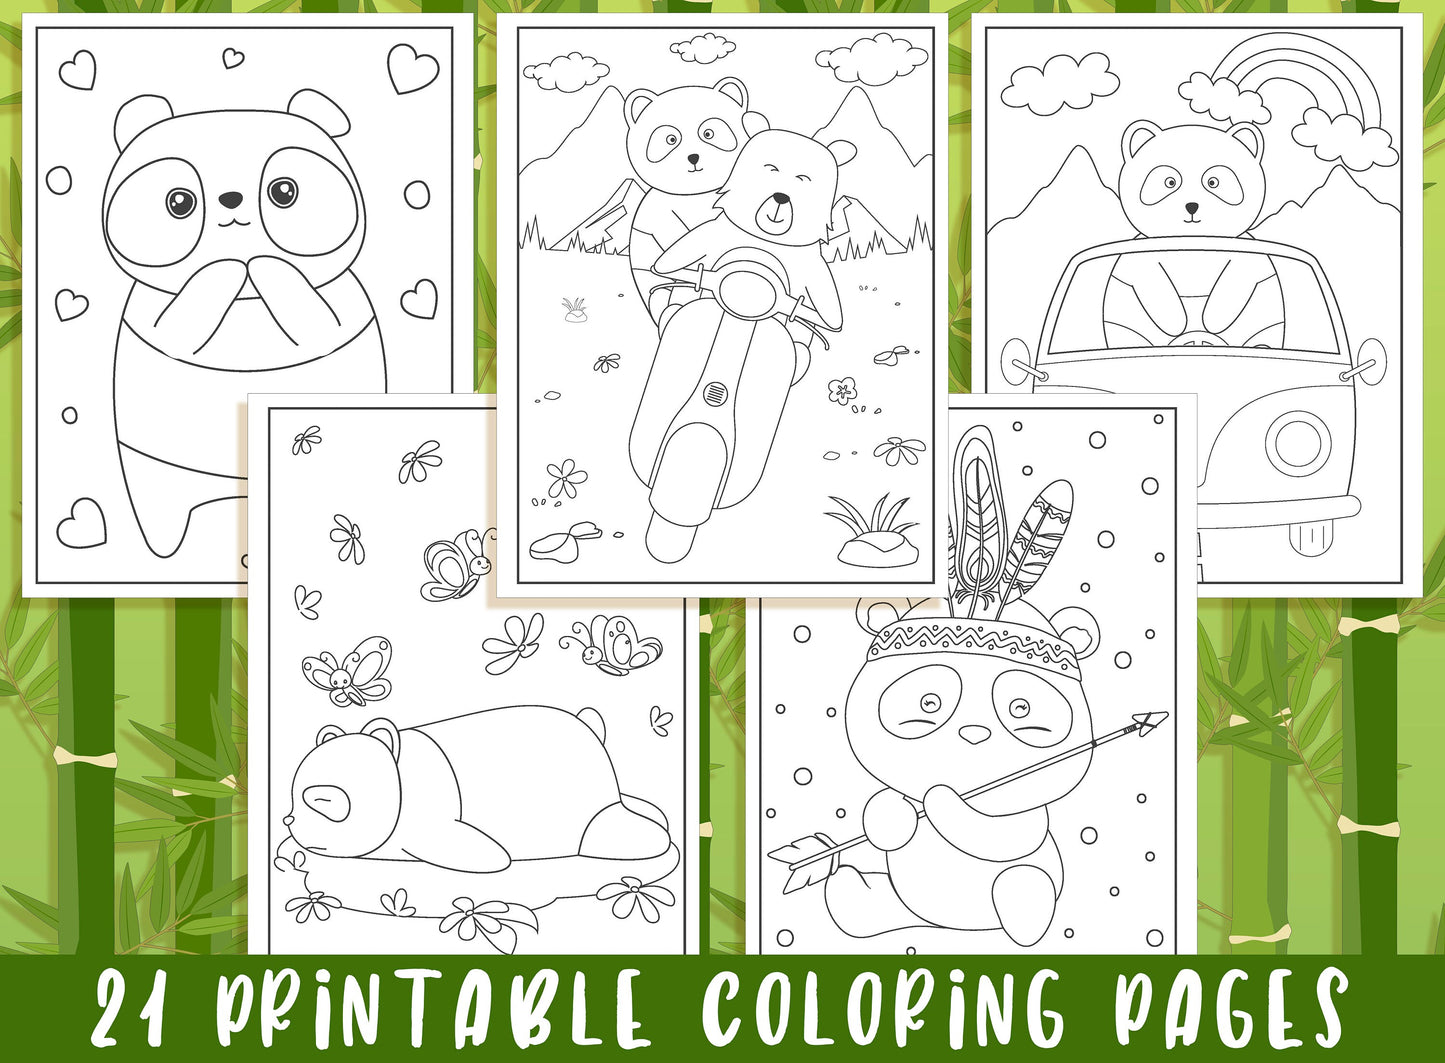 Panda Coloring Pages - 21 Printable Panda Coloring Pages for Kids, Boys, Girls, Teens, Panda Birthday Party Activity - Instant Download.